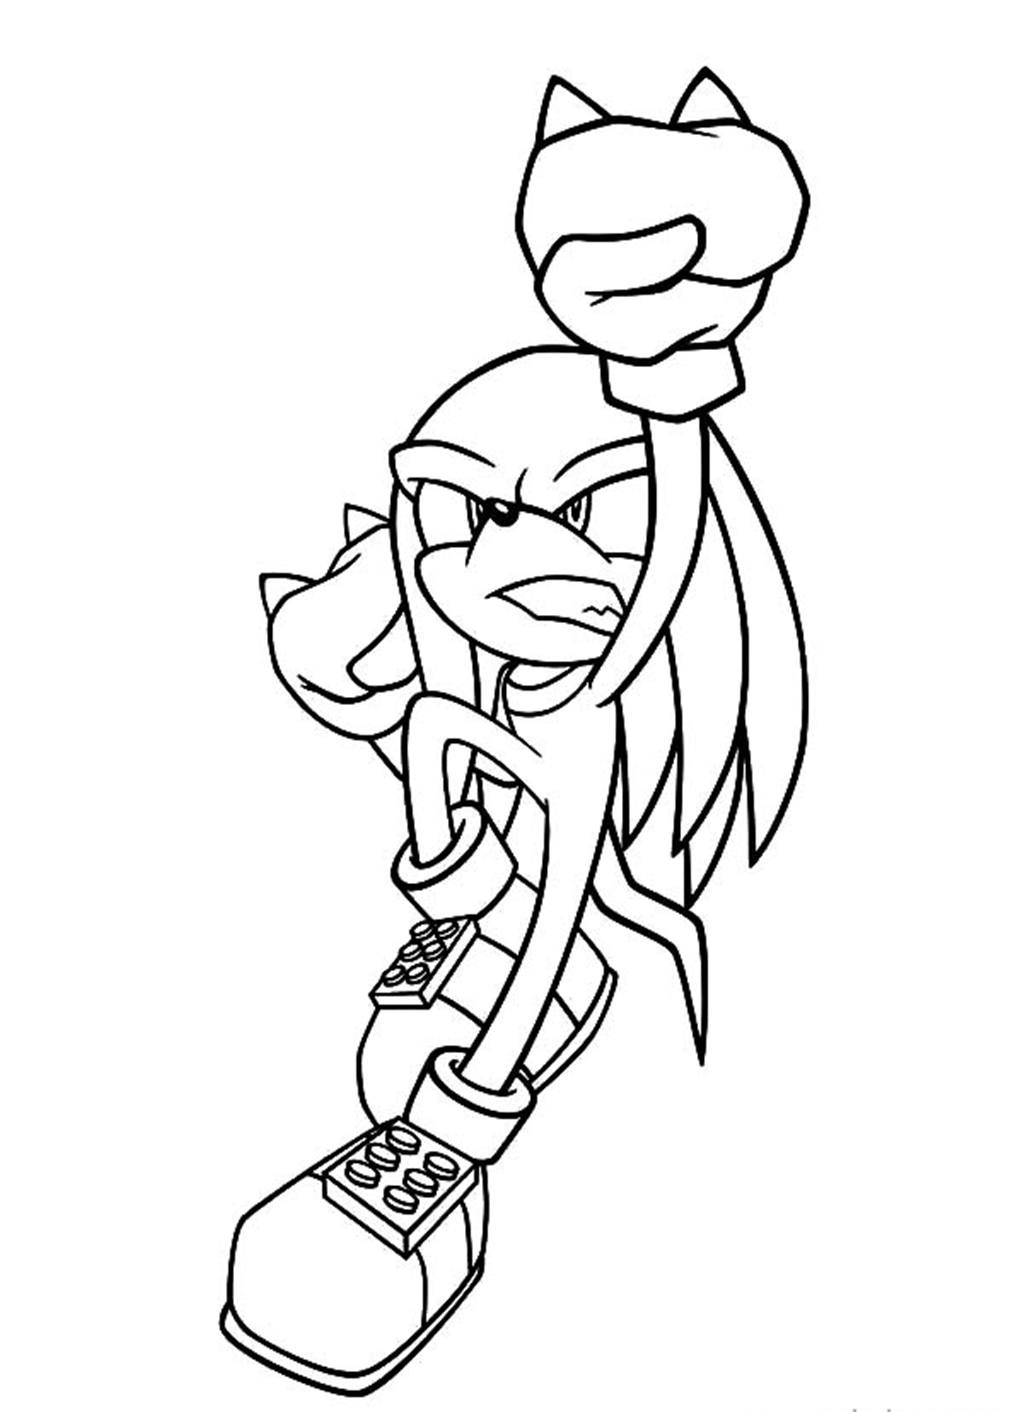 Printable Knuckles Coloring Pages - SEGA Knuckles The Echidna Coloring Pages